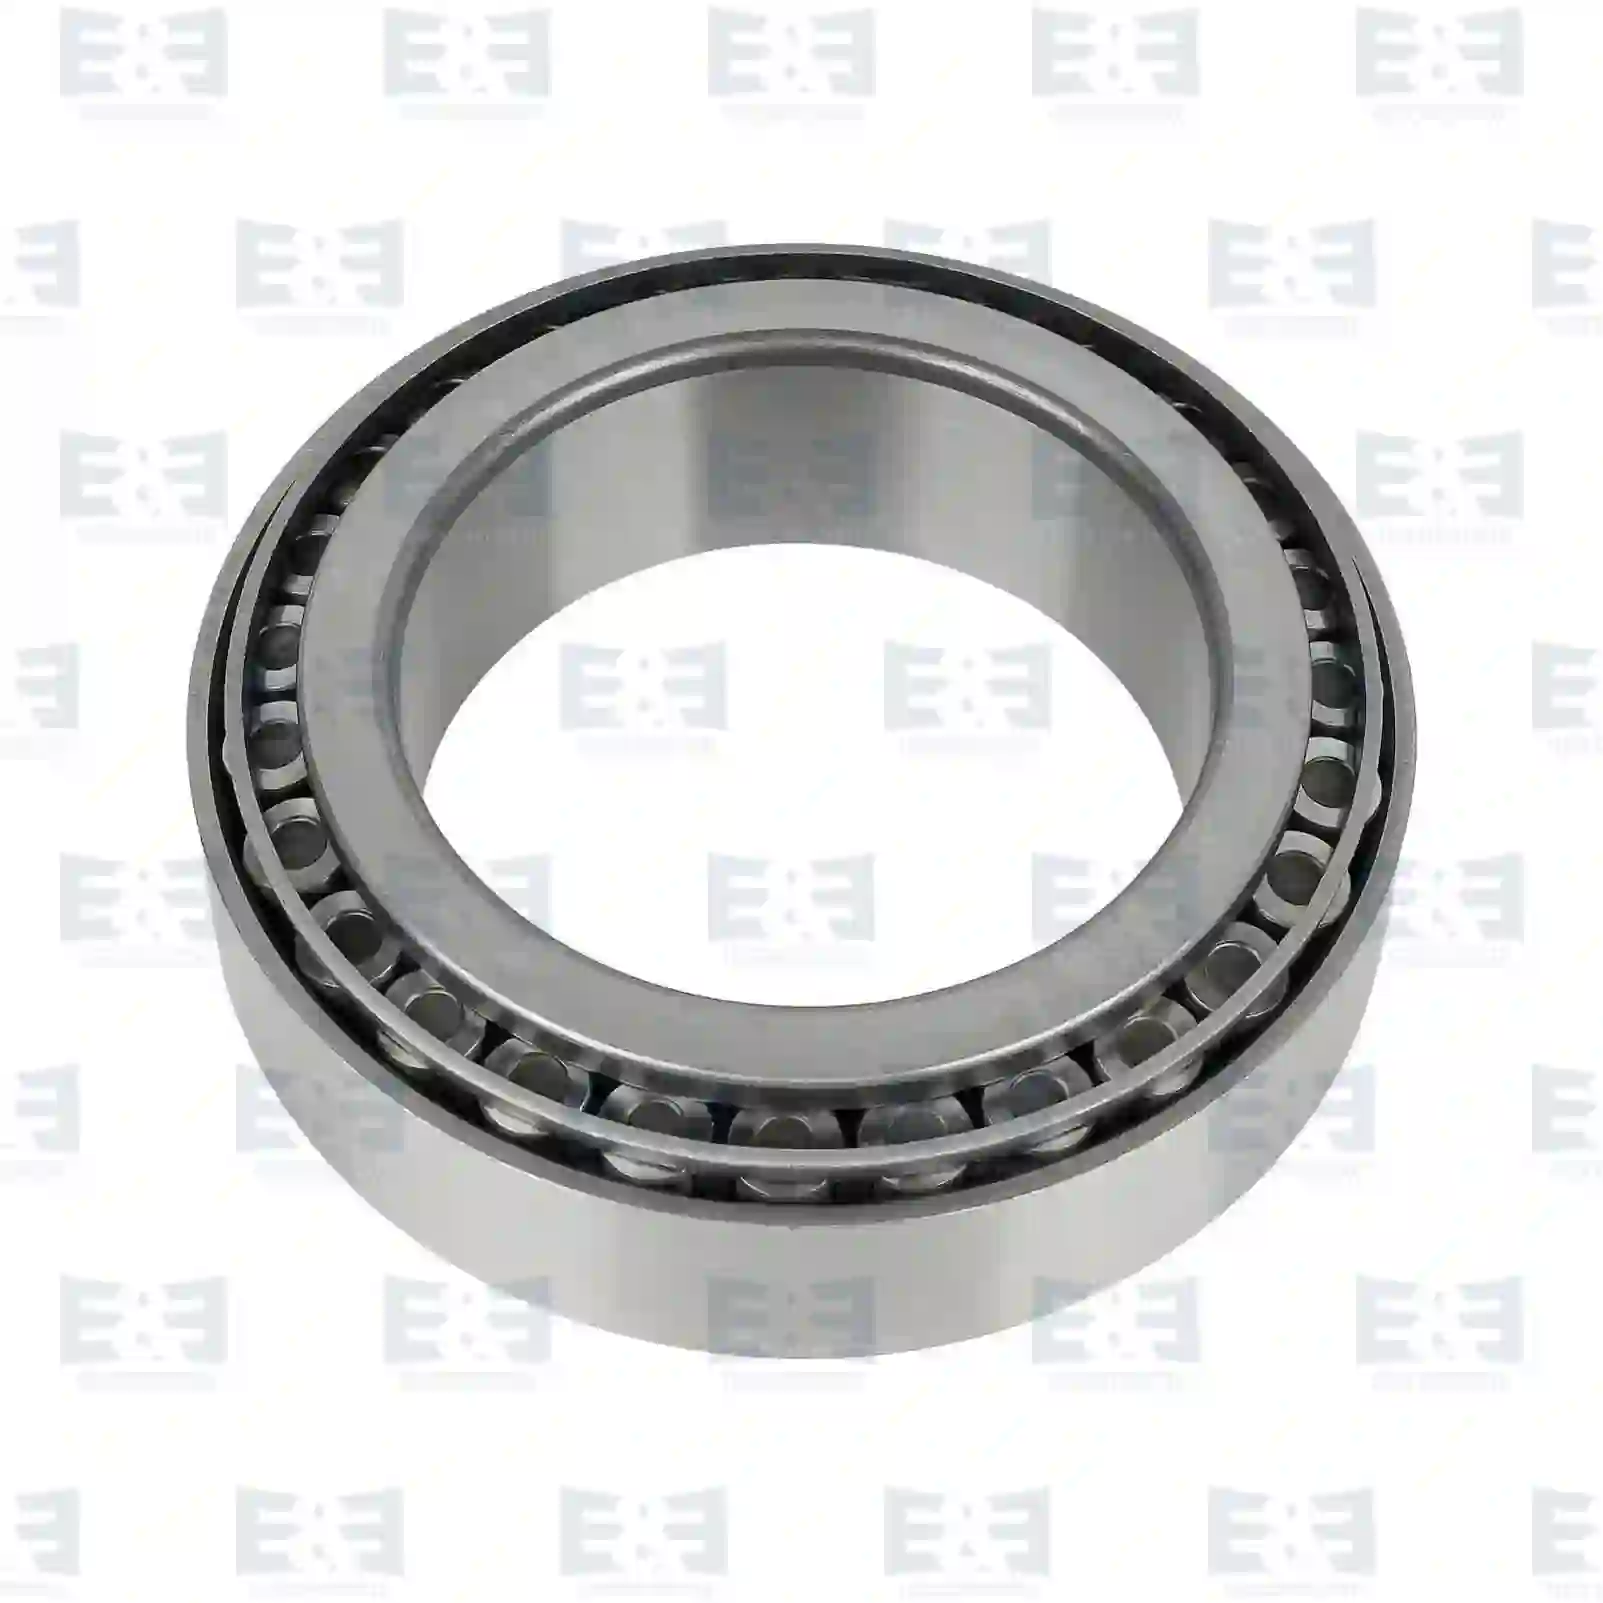 Tapered roller bearing, 2E2286212, 0528430, 0676987, 528430, 676987, 005092802, 01104923, 01104923, 1104923, 06324990036, 06324990123, 81934200185, 81934200036, 87524601503, N1011053455, 0009809602, 0029818405, 0029819005, 0039818605, 0209814805, 3869817705, 0023432871, 676987, WHT006376, ZG03023-0008 ||  2E2286212 E&E Truck Spare Parts | Truck Spare Parts, Auotomotive Spare Parts Tapered roller bearing, 2E2286212, 0528430, 0676987, 528430, 676987, 005092802, 01104923, 01104923, 1104923, 06324990036, 06324990123, 81934200185, 81934200036, 87524601503, N1011053455, 0009809602, 0029818405, 0029819005, 0039818605, 0209814805, 3869817705, 0023432871, 676987, WHT006376, ZG03023-0008 ||  2E2286212 E&E Truck Spare Parts | Truck Spare Parts, Auotomotive Spare Parts